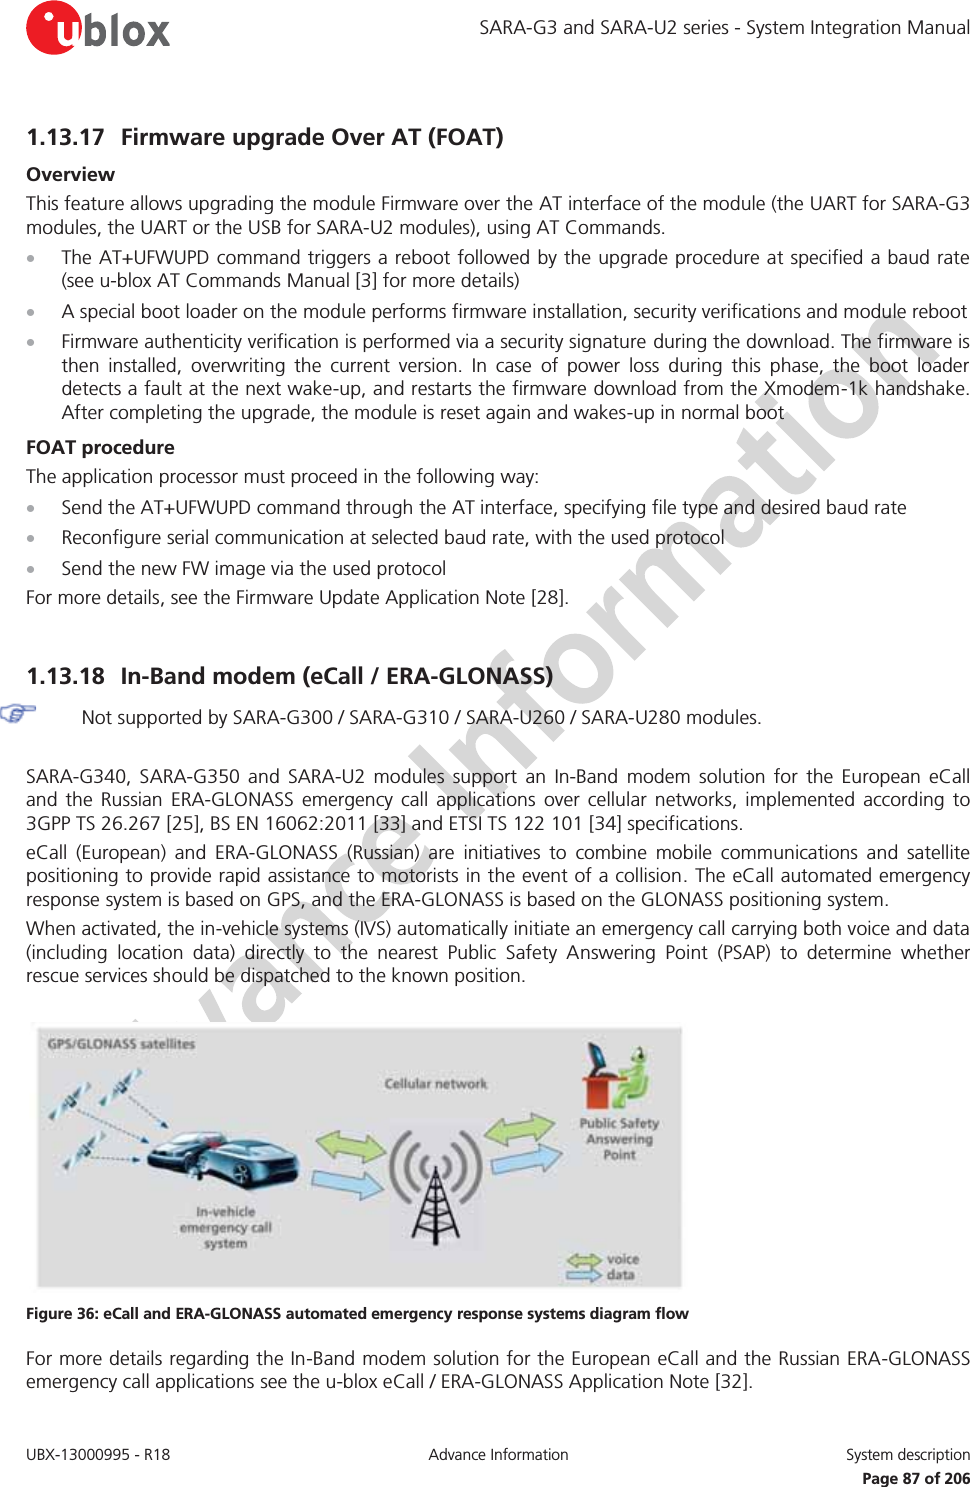 SARA-G3 and SARA-U2 series - System Integration Manual UBX-13000995 - R18  Advance Information  System description   Page 87 of 206 1.13.17 Firmware upgrade Over AT (FOAT)  Overview This feature allows upgrading the module Firmware over the AT interface of the module (the UART for SARA-G3 modules, the UART or the USB for SARA-U2 modules), using AT Commands. x The AT+UFWUPD command triggers a reboot followed by the upgrade procedure at specified a baud rate (see u-blox AT Commands Manual [3] for more details) x A special boot loader on the module performs firmware installation, security verifications and module reboot x Firmware authenticity verification is performed via a security signature during the download. The firmware is then installed, overwriting the current version. In case of power loss during this phase, the boot loader detects a fault at the next wake-up, and restarts the firmware download from the Xmodem-1k handshake. After completing the upgrade, the module is reset again and wakes-up in normal boot FOAT procedure The application processor must proceed in the following way: x Send the AT+UFWUPD command through the AT interface, specifying file type and desired baud rate x Reconfigure serial communication at selected baud rate, with the used protocol x Send the new FW image via the used protocol For more details, see the Firmware Update Application Note [28].  1.13.18 In-Band modem (eCall / ERA-GLONASS)   Not supported by SARA-G300 / SARA-G310 / SARA-U260 / SARA-U280 modules.  SARA-G340, SARA-G350 and SARA-U2 modules support an In-Band modem solution for the European eCall and the Russian ERA-GLONASS emergency call applications over cellular networks, implemented according to 3GPP TS 26.267 [25], BS EN 16062:2011 [33] and ETSI TS 122 101 [34] specifications. eCall (European) and ERA-GLONASS (Russian) are initiatives to combine mobile communications and satellite positioning to provide rapid assistance to motorists in the event of a collision. The eCall automated emergency response system is based on GPS, and the ERA-GLONASS is based on the GLONASS positioning system. When activated, the in-vehicle systems (IVS) automatically initiate an emergency call carrying both voice and data (including location data) directly to the nearest Public Safety Answering Point (PSAP) to determine whether rescue services should be dispatched to the known position.   Figure 36: eCall and ERA-GLONASS automated emergency response systems diagram flow For more details regarding the In-Band modem solution for the European eCall and the Russian ERA-GLONASS emergency call applications see the u-blox eCall / ERA-GLONASS Application Note [32].  